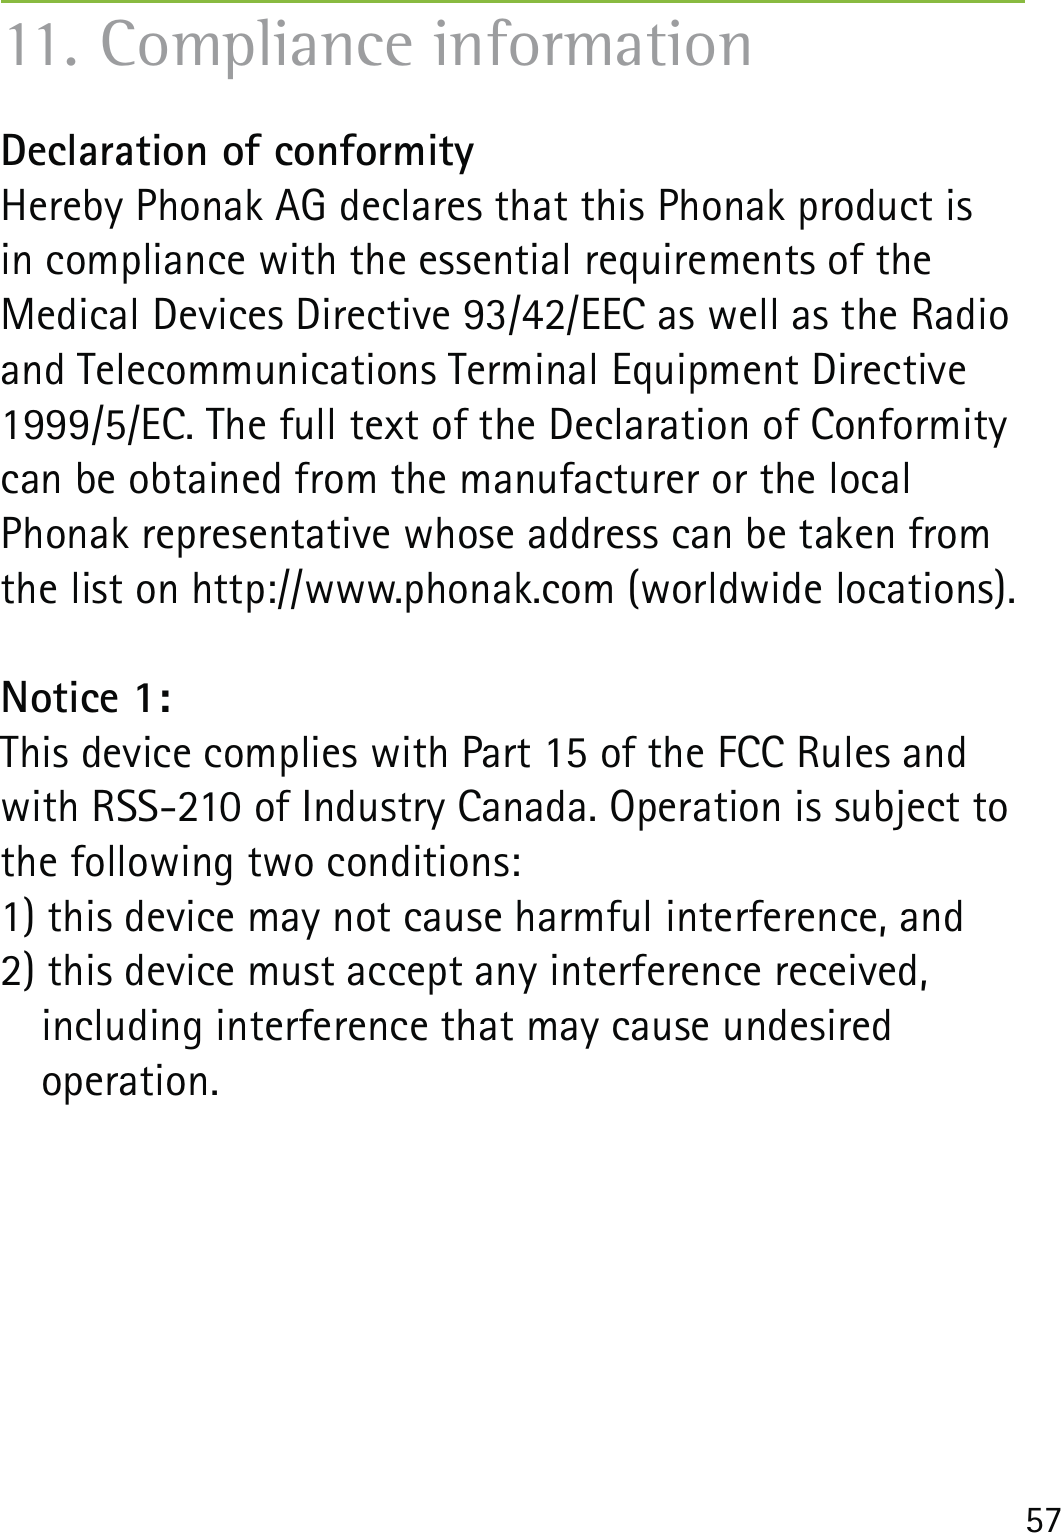 57Declaration of conformity Hereby Phonak AG declares that this Phonak product is  in compliance with the essential requirements of the  Medical Devices Directive 93/42/EEC as well as the Radio and Telecommunications Terminal Equipment Directive 1999/5/EC. The full text of the Declaration of Conformity can be obtained from the manufacturer or the local  Phonak representative whose address can be taken from the list on http://www.phonak.com (worldwide locations).Notice 1:This device complies with Part 15 of the FCC Rules and with RSS-210 of Industry Canada. Operation is subject to the following two conditions:1) this device may not cause harmful interference, and 2) this device must accept any interference received,    including interference that may cause undesired   operation.11. Compliance information